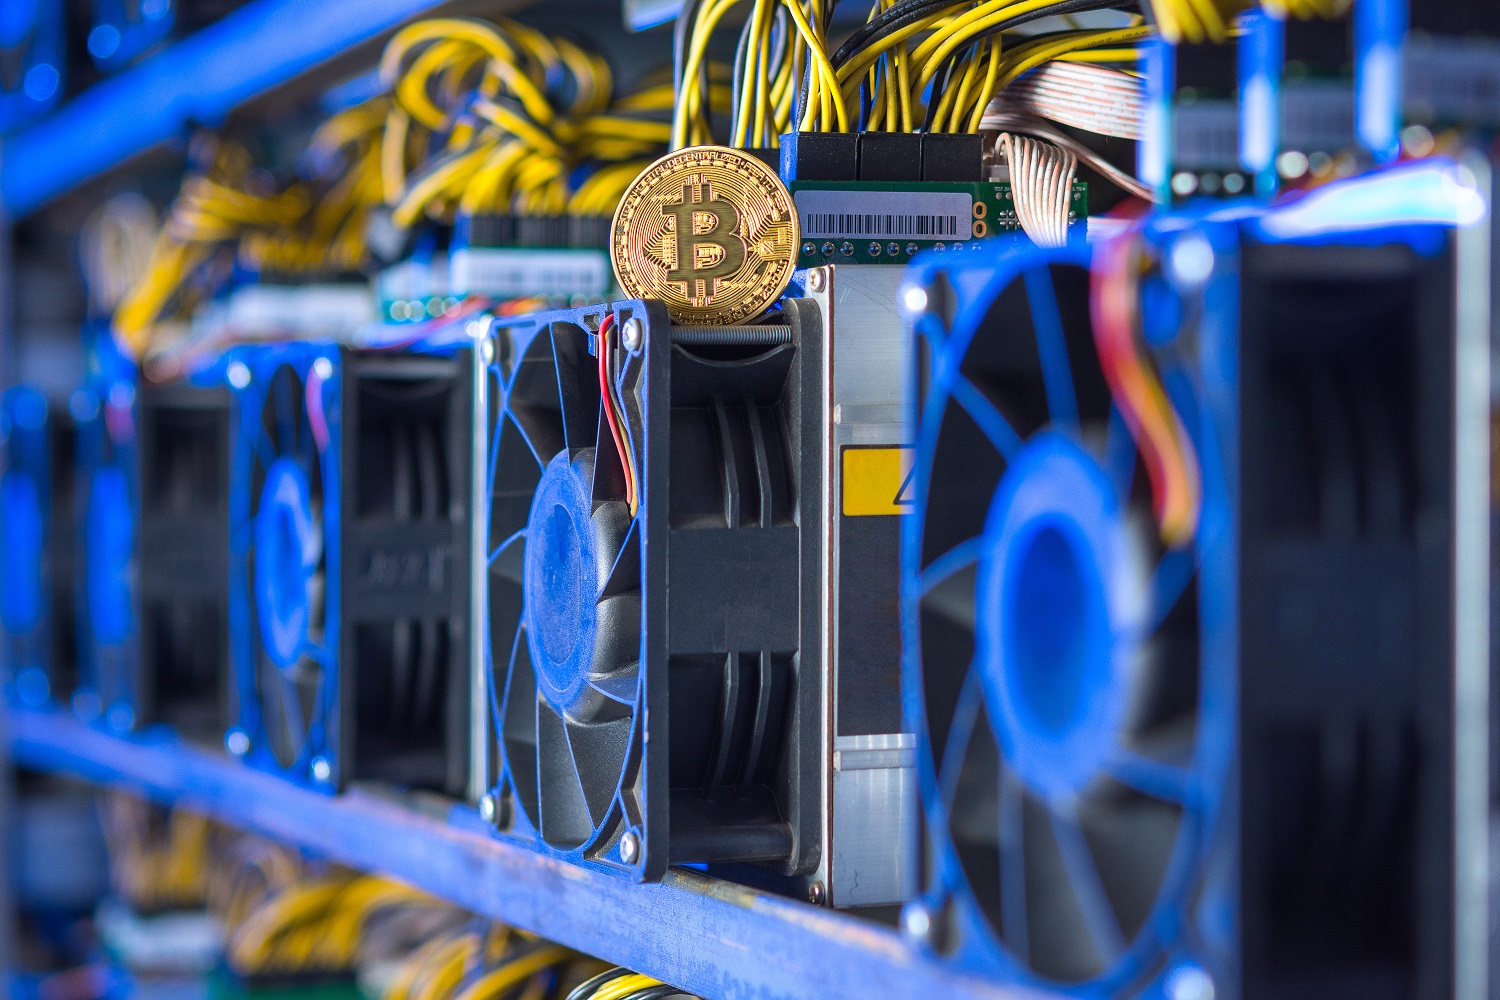 A token intended to represent Bitcoin atop a rig used to mine cryptoassets.